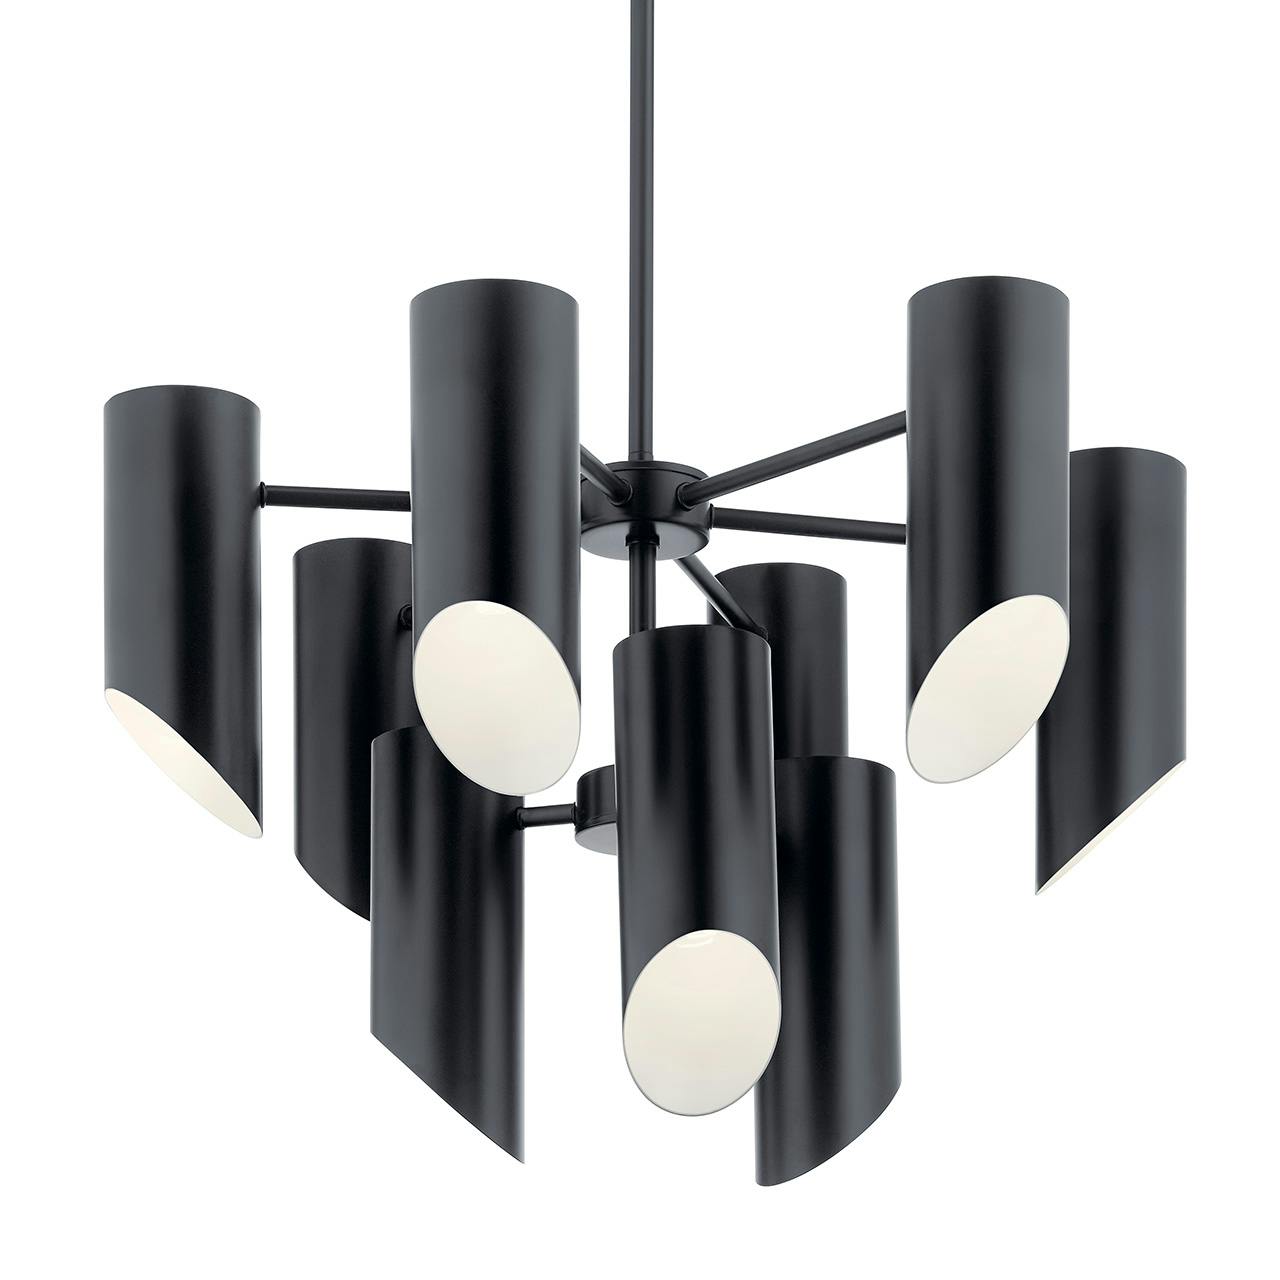 Trentino 9 Light Chandelier Black without the canopy on a white background